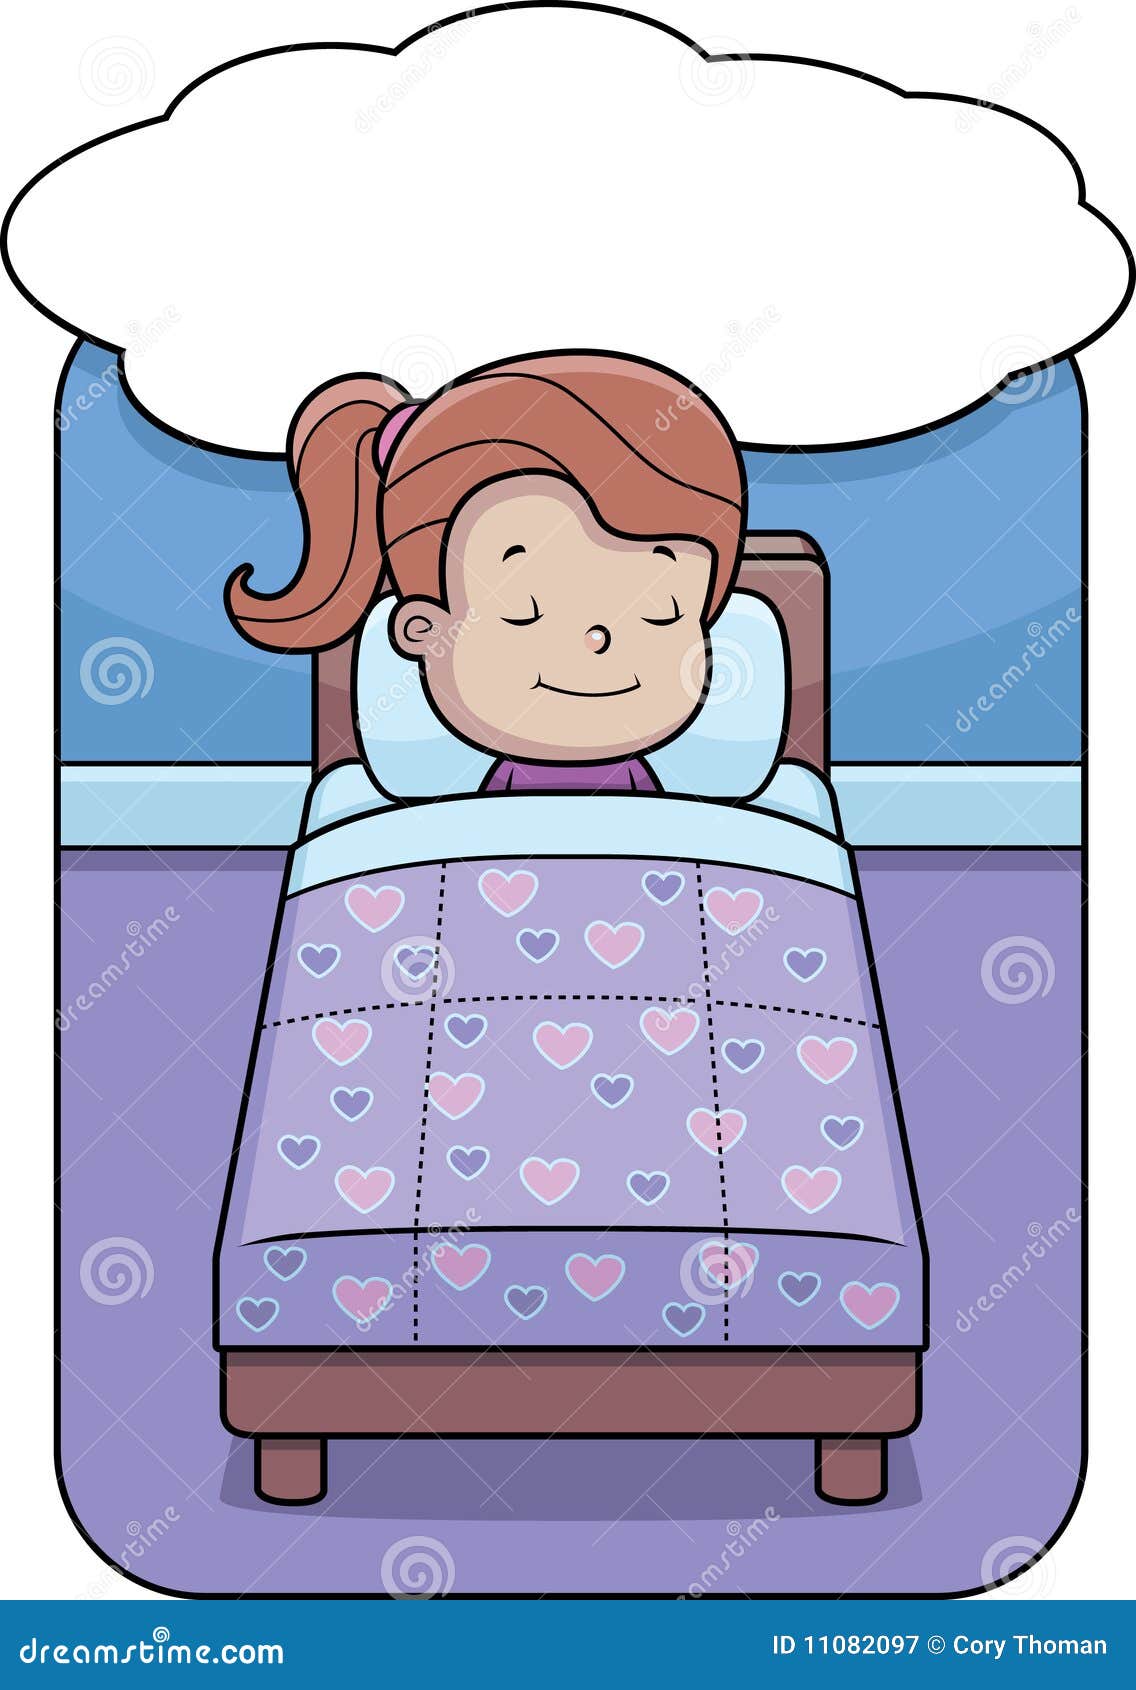 clipart girl sleeping in bed - photo #13